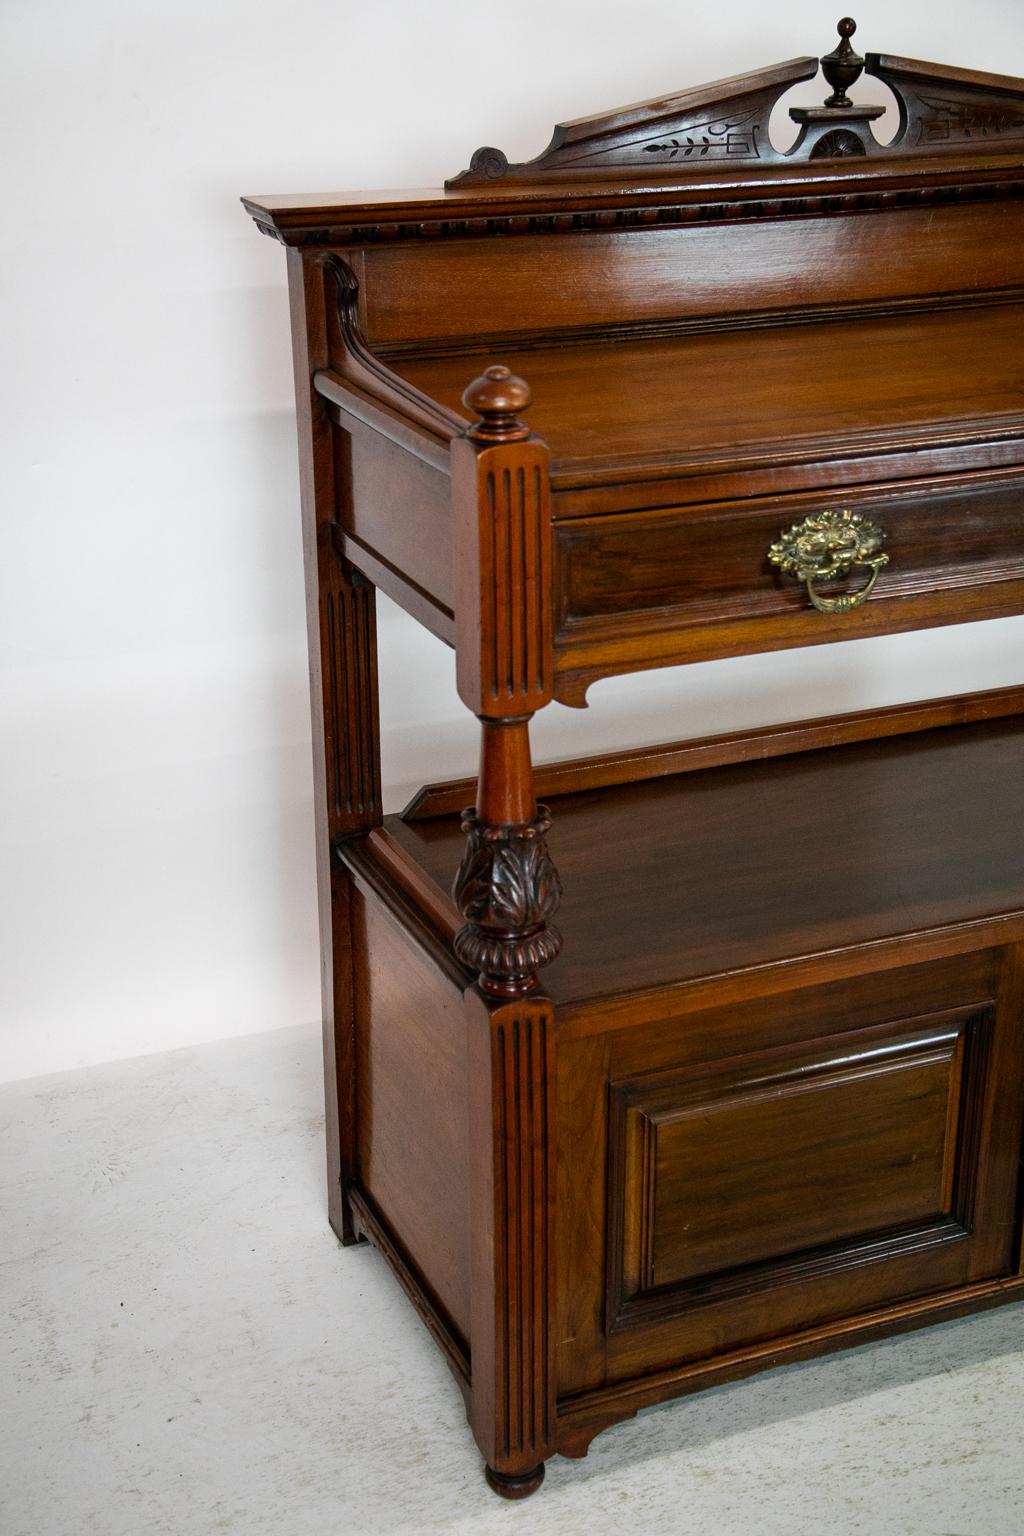 Two-Tiered Mahogany Serving Cupboard In Good Condition For Sale In Wilson, NC